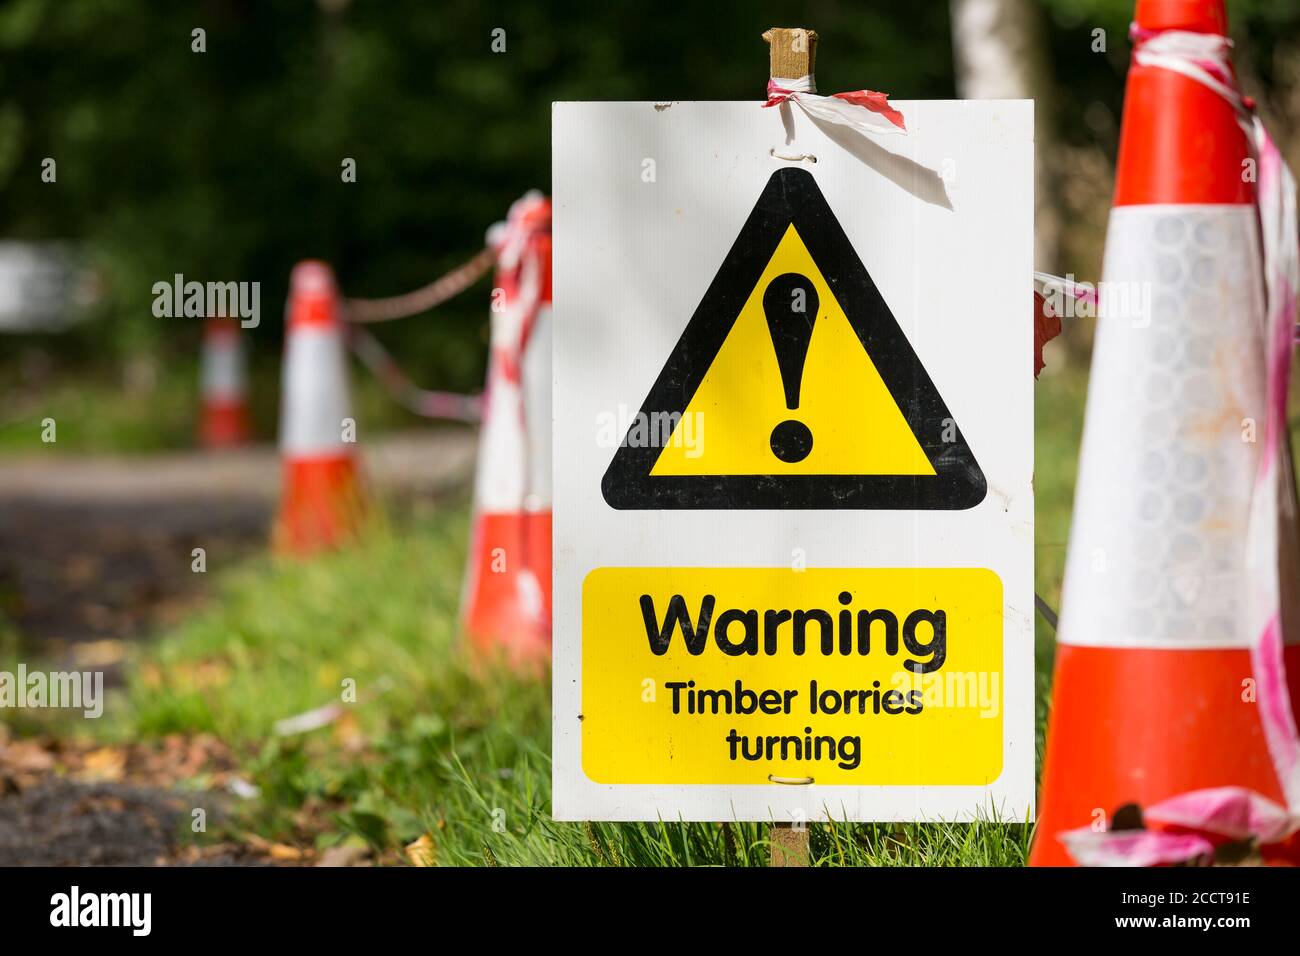 Warning Timber Lorries turning - countryside health and safety sign on UK country road. Stock Photo